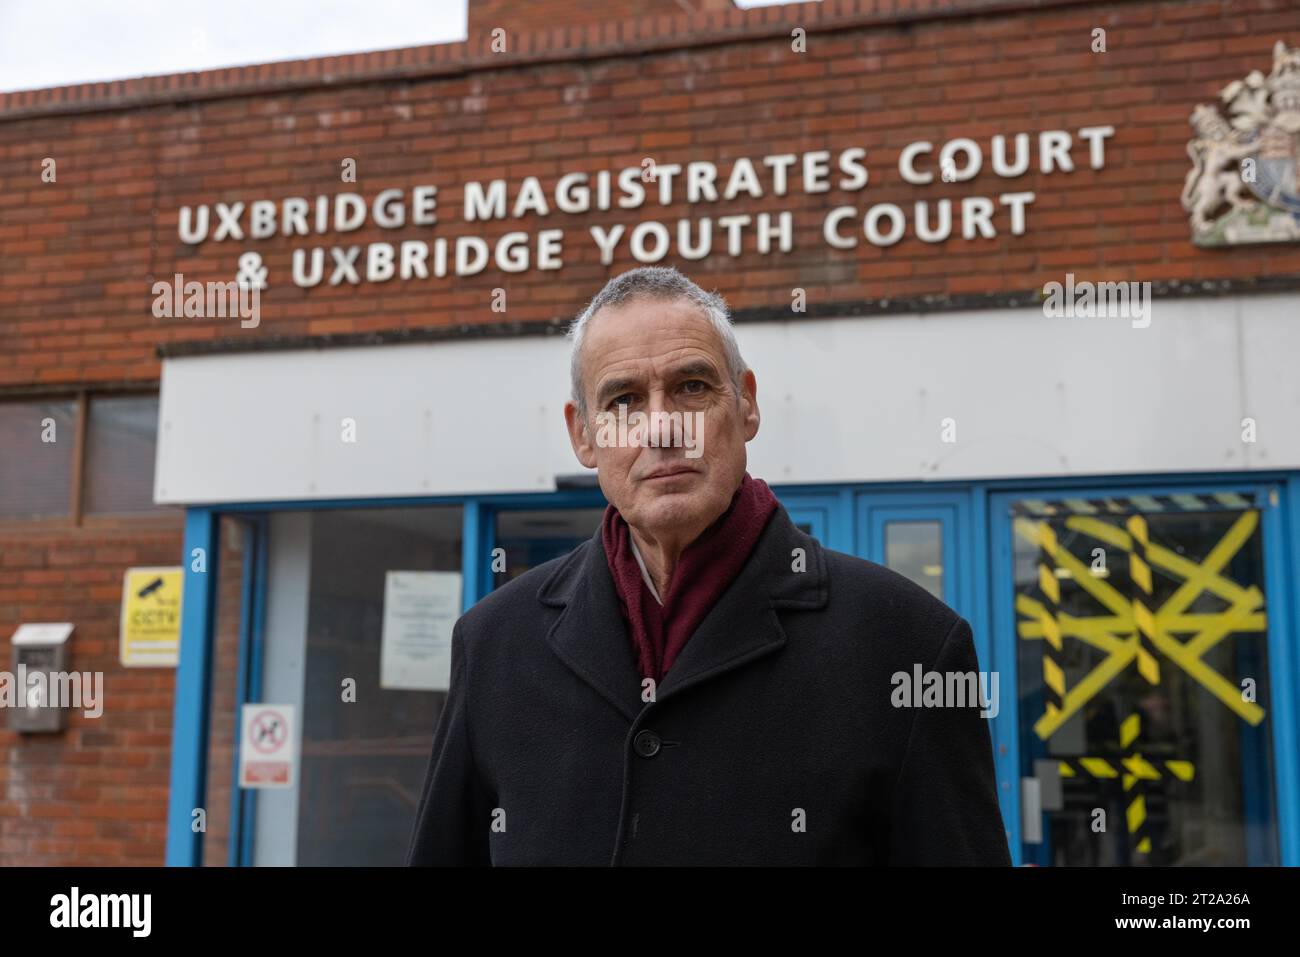 Stephen Green, 72, Christian preacher prosecuted for holding a sign carrying a quote from the Bible outside an abortion clinic, Uxbridge Magistrates. Stock Photo